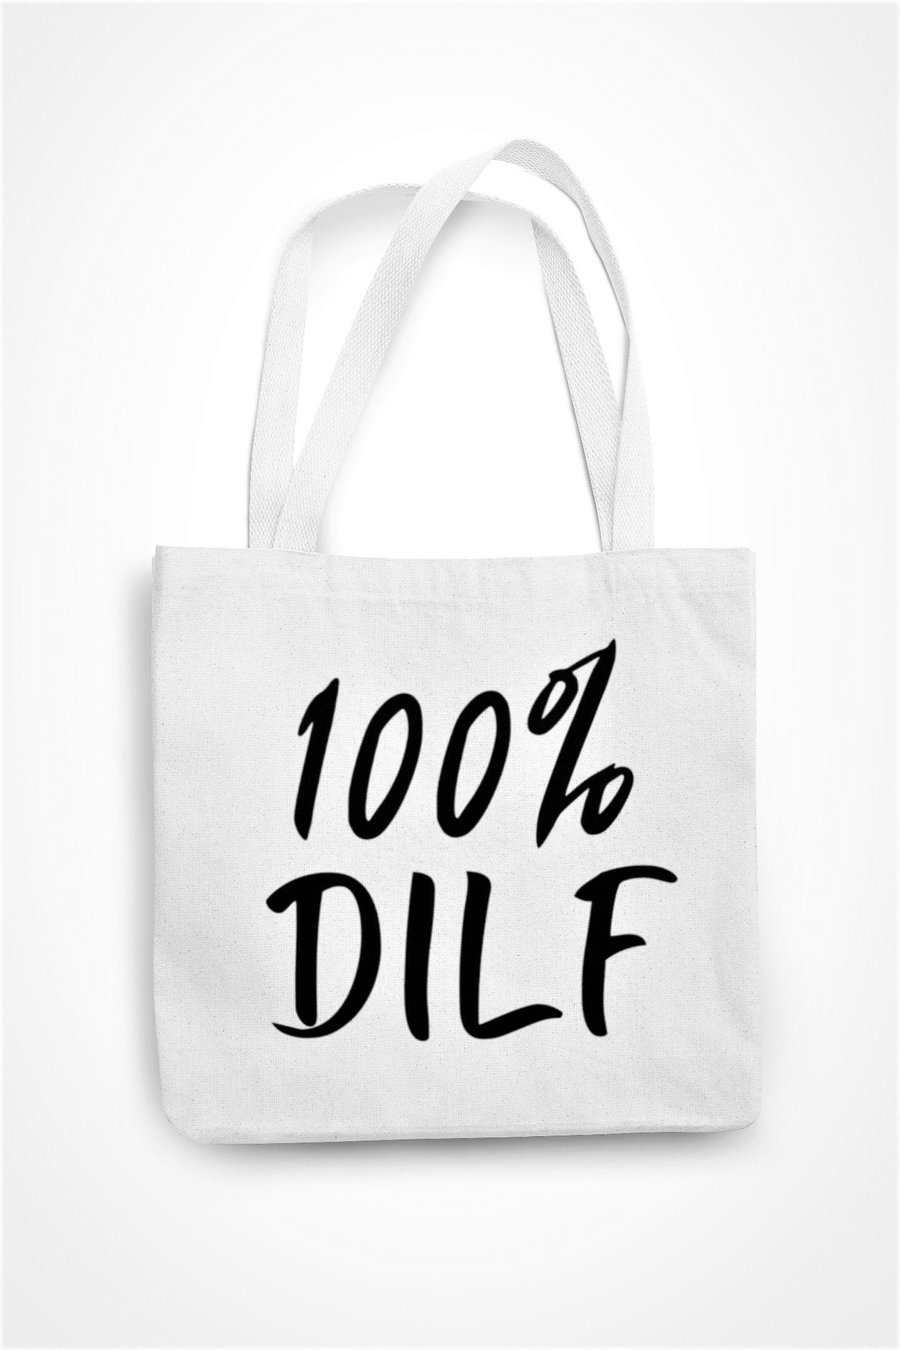 100% Dilf Tote Bag Eco Friendly Shopping Bag Hilarious Dad Fathers Birthday gift